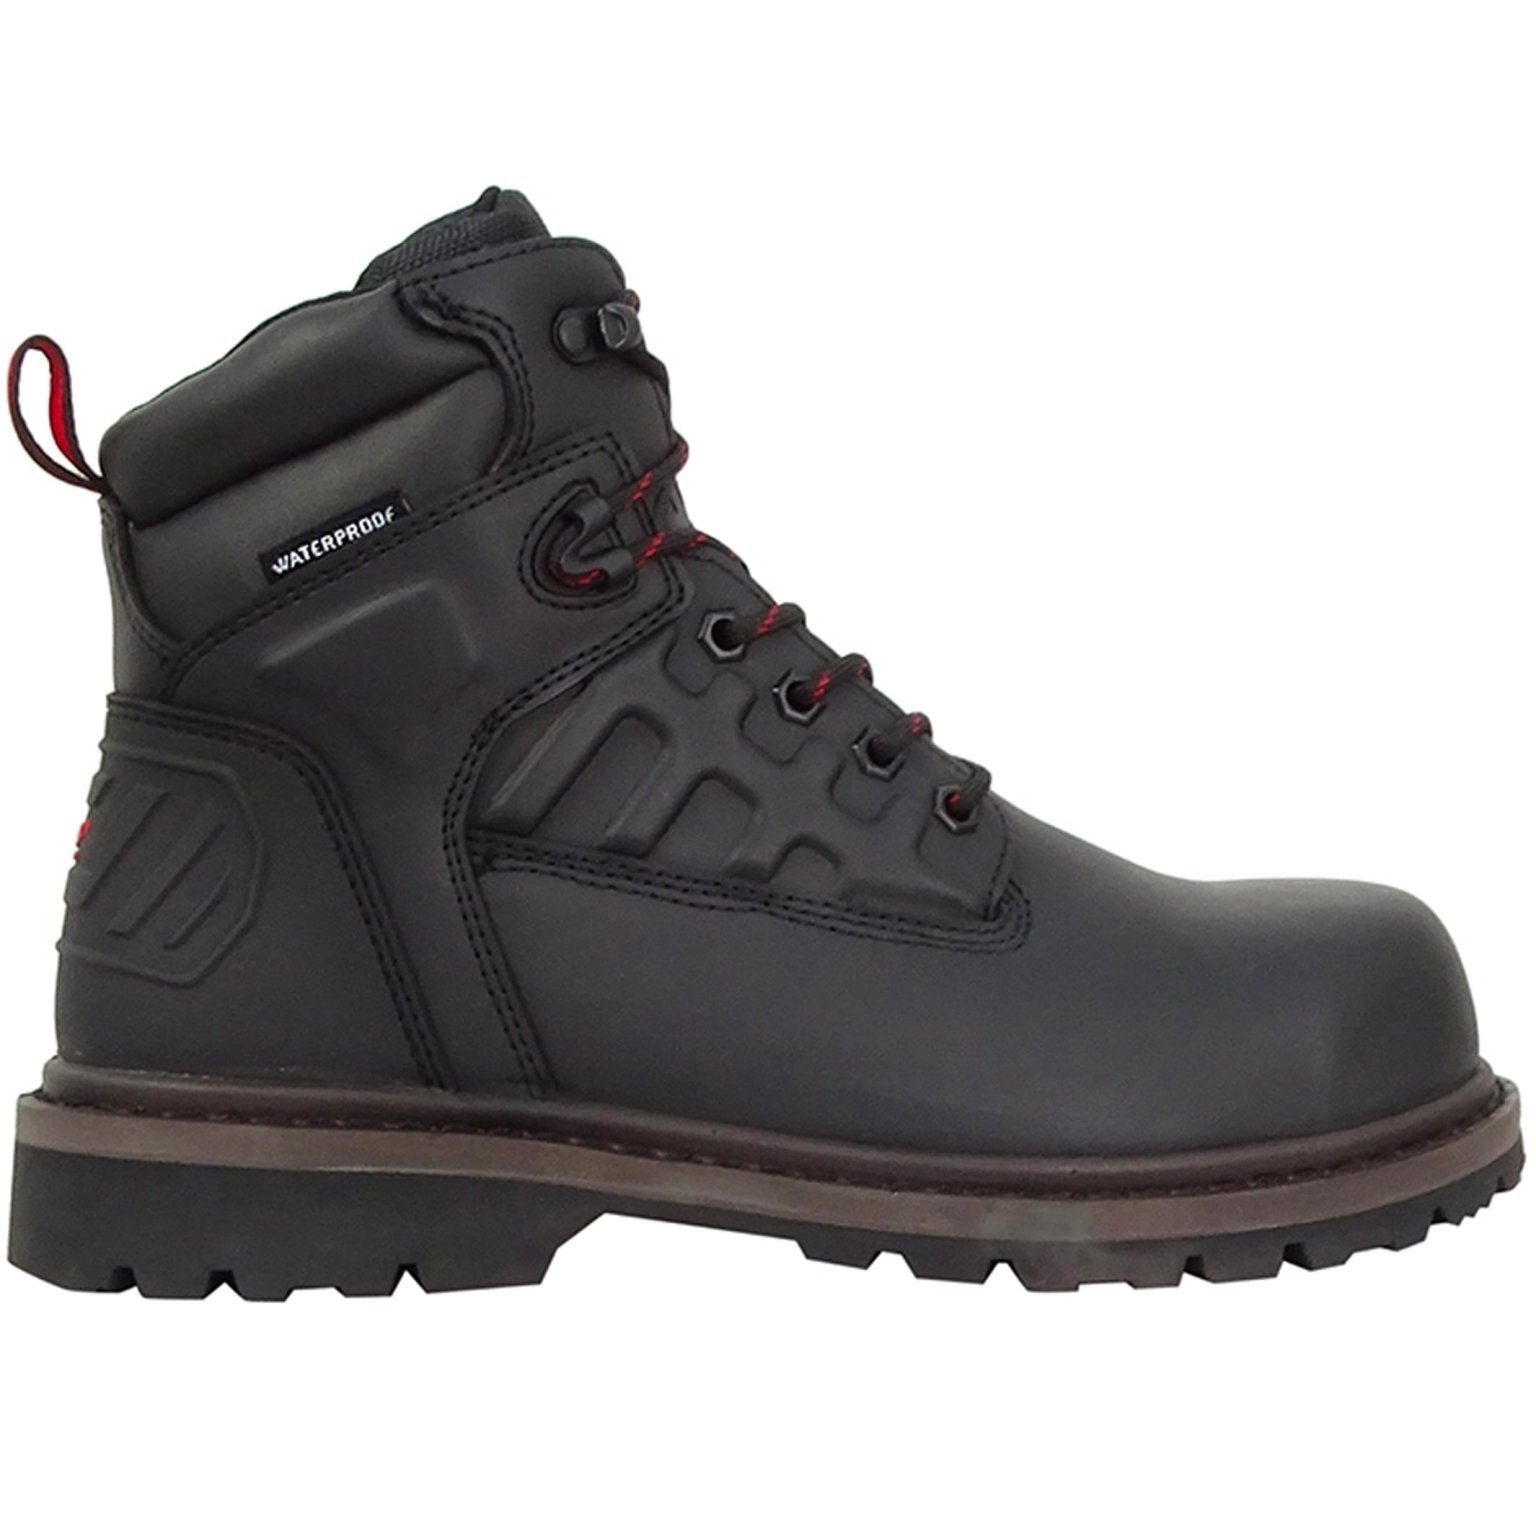 Hoggs of Fife Hoggs of Fife - Hercules Safety Lace up Boots - Steel Toe Cap boots Safety Footwear